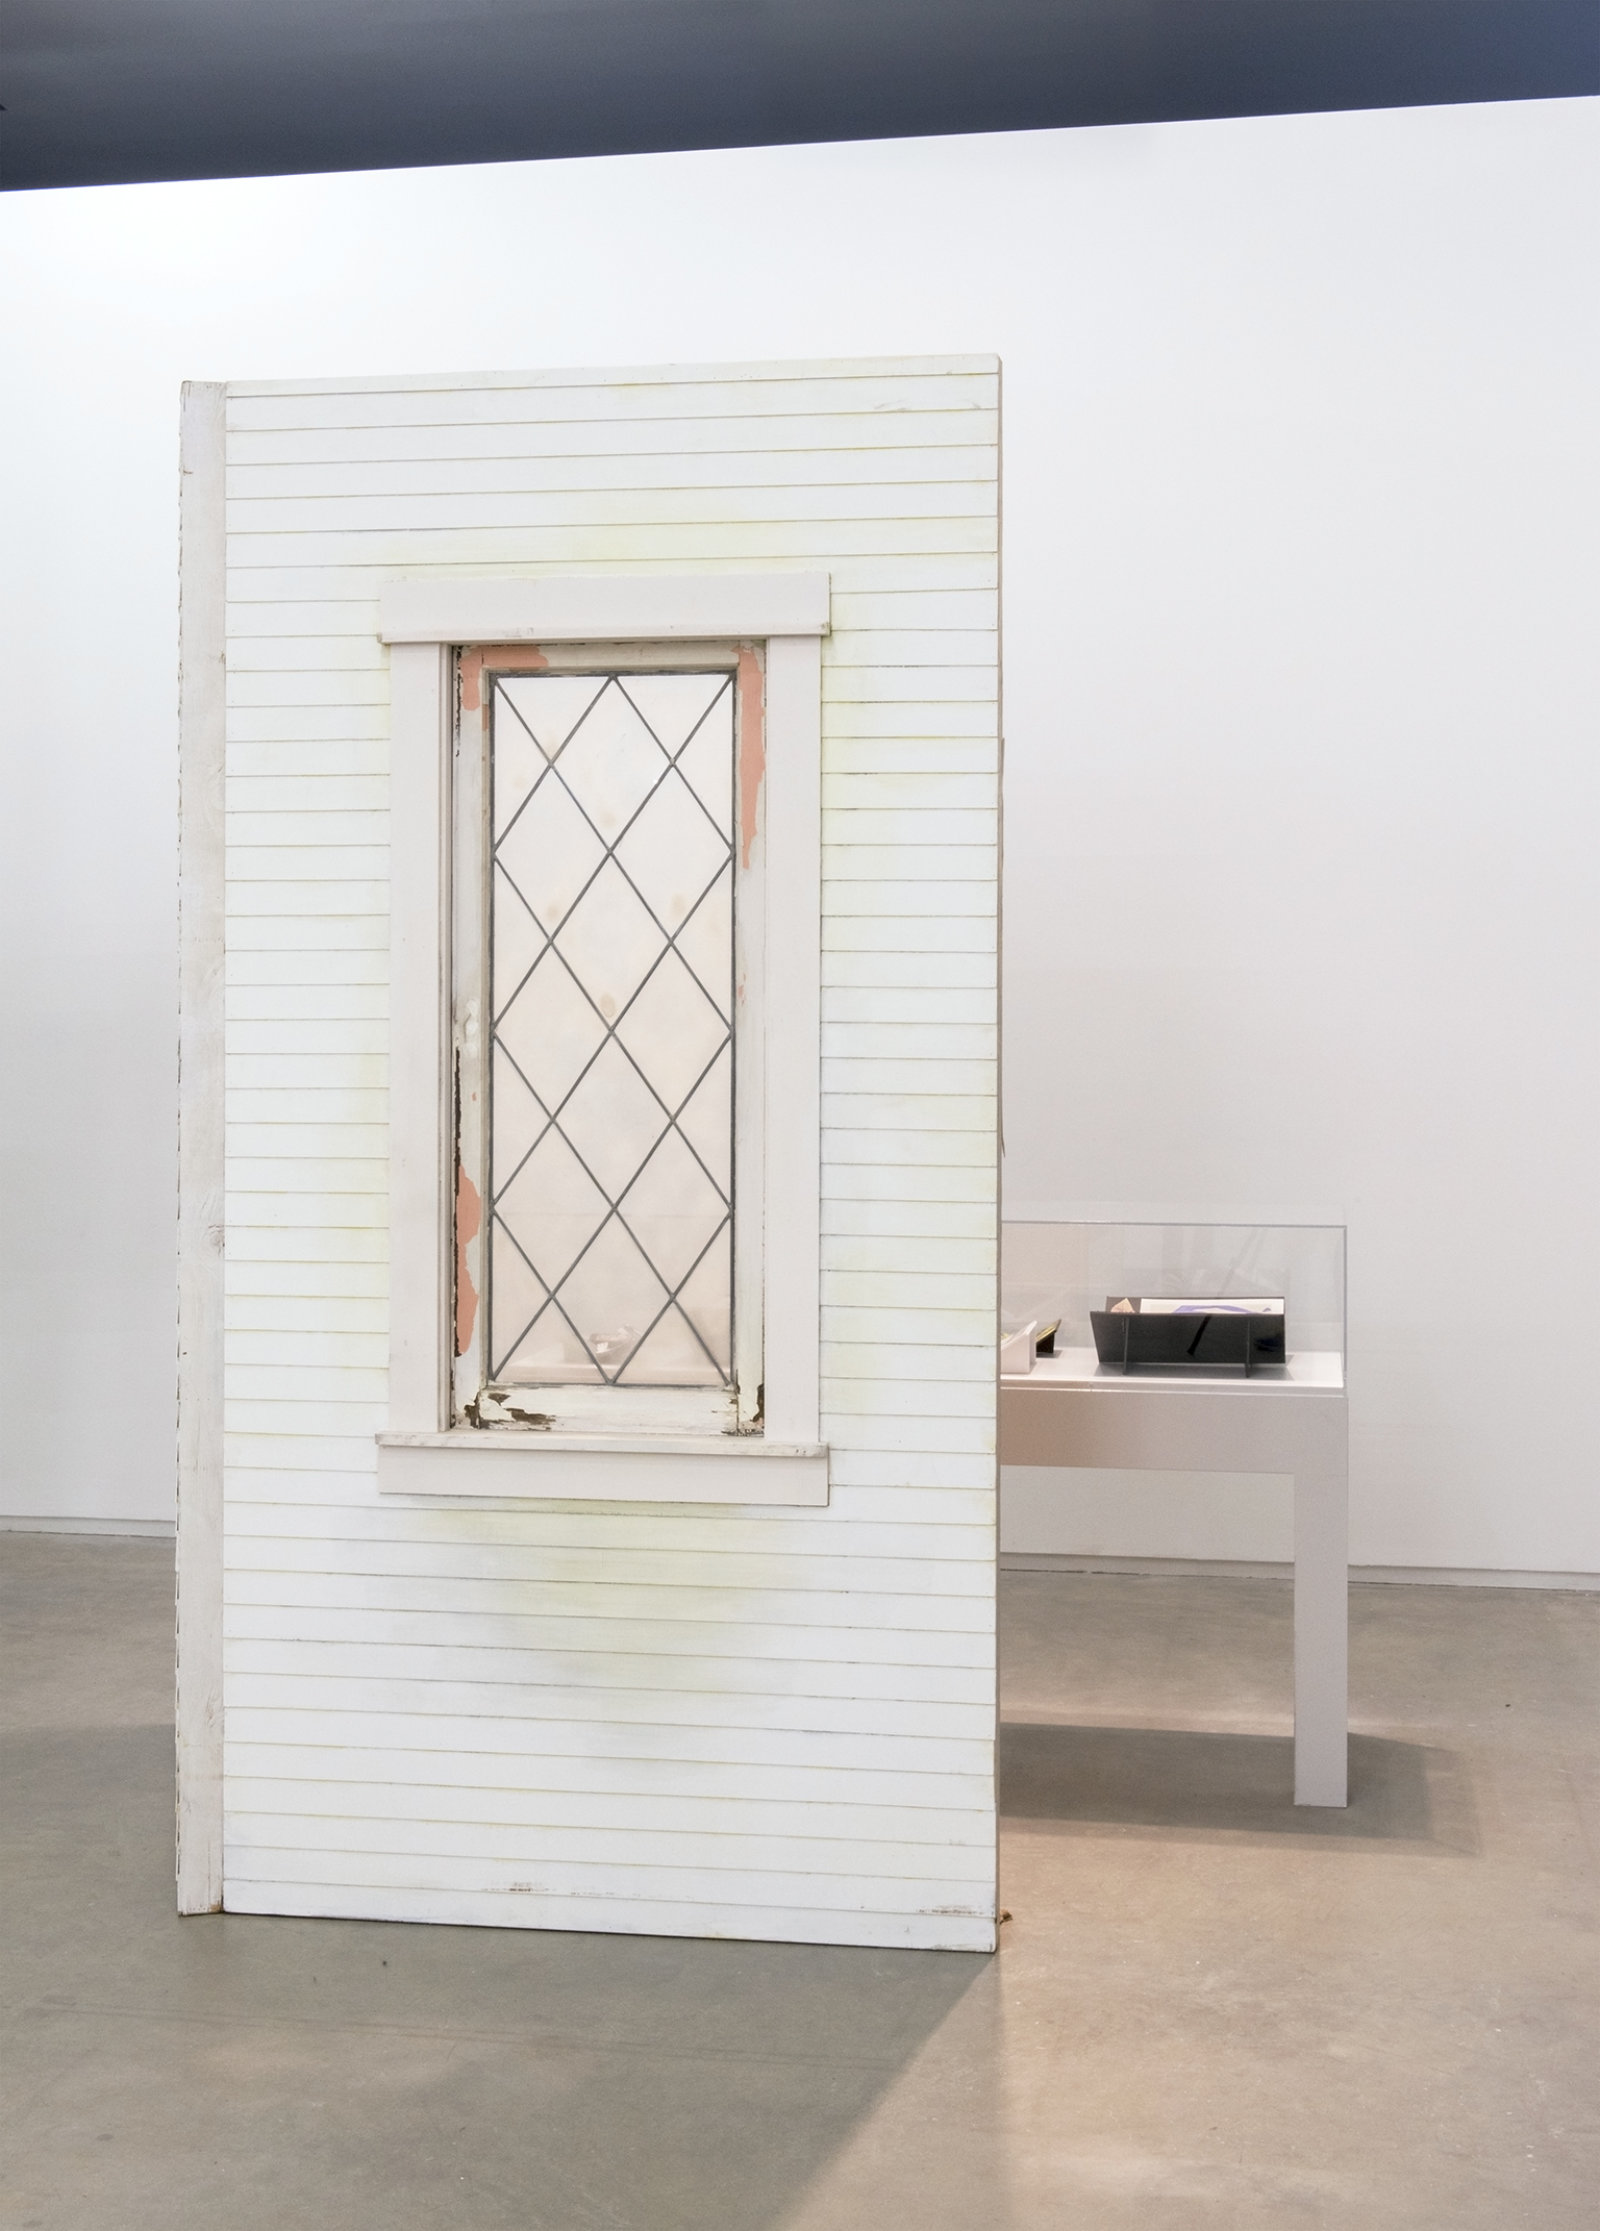 Geoffrey Farmer, Journals with Norman Bates (Fountain), 2014, vitrine with 8 cut-outs collaged on foamcore, 2 wooden wall façades, paint, window, sandbags, framed cut-outs and ink mounted on paper, dimensions variable